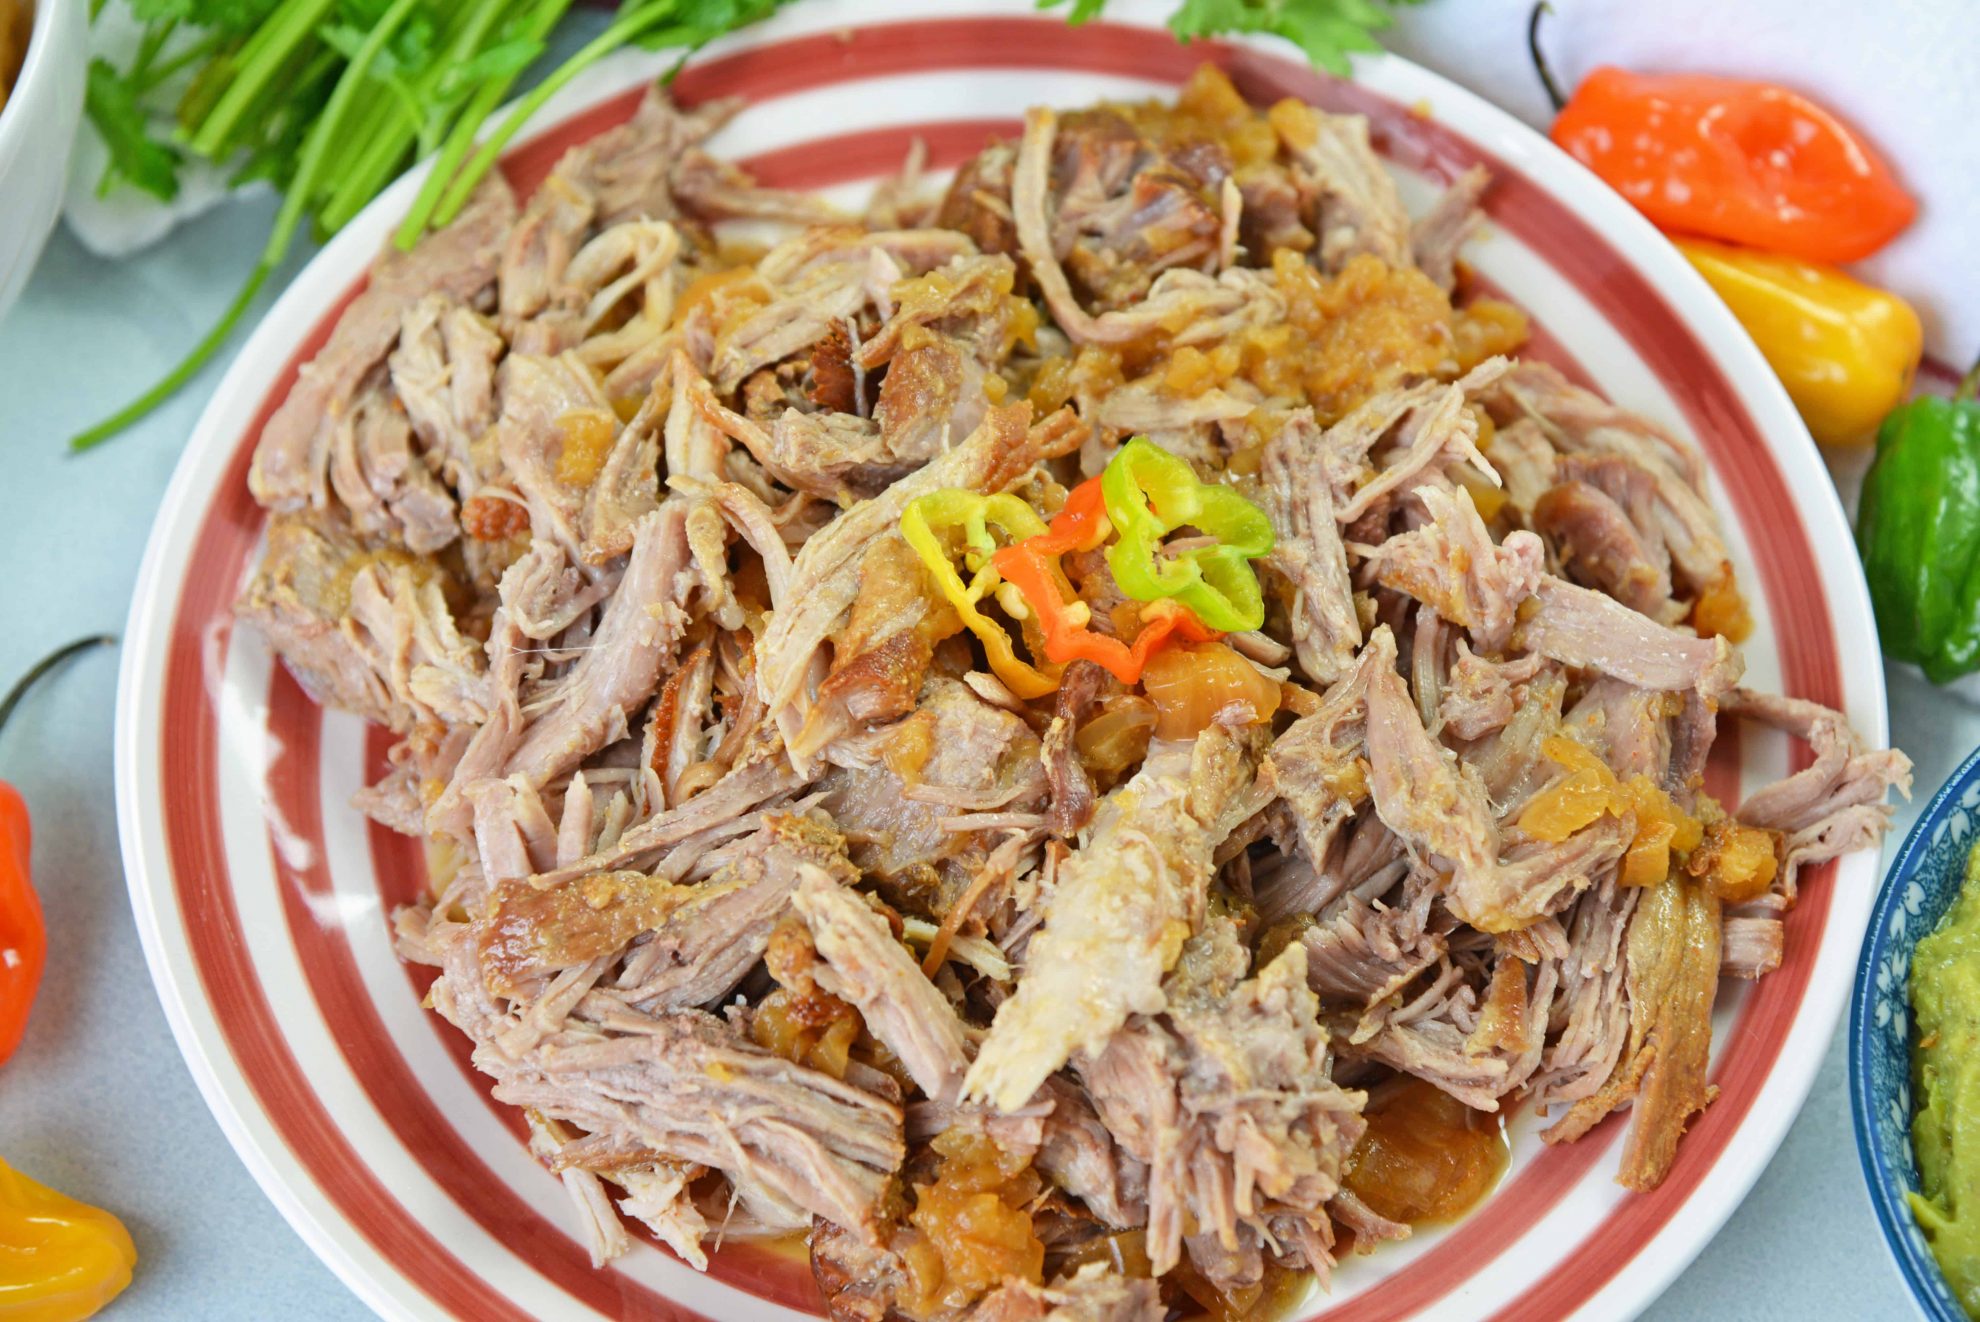 Pressure Cooker Carnitas are an easy pressure cooker recipe for shredded pork with Mexican flavors. Perfect for making the perfect soft taco! #pressurecookercarnitas #instantpotcarnitas #easycarnitas www.savoryexperiments.com